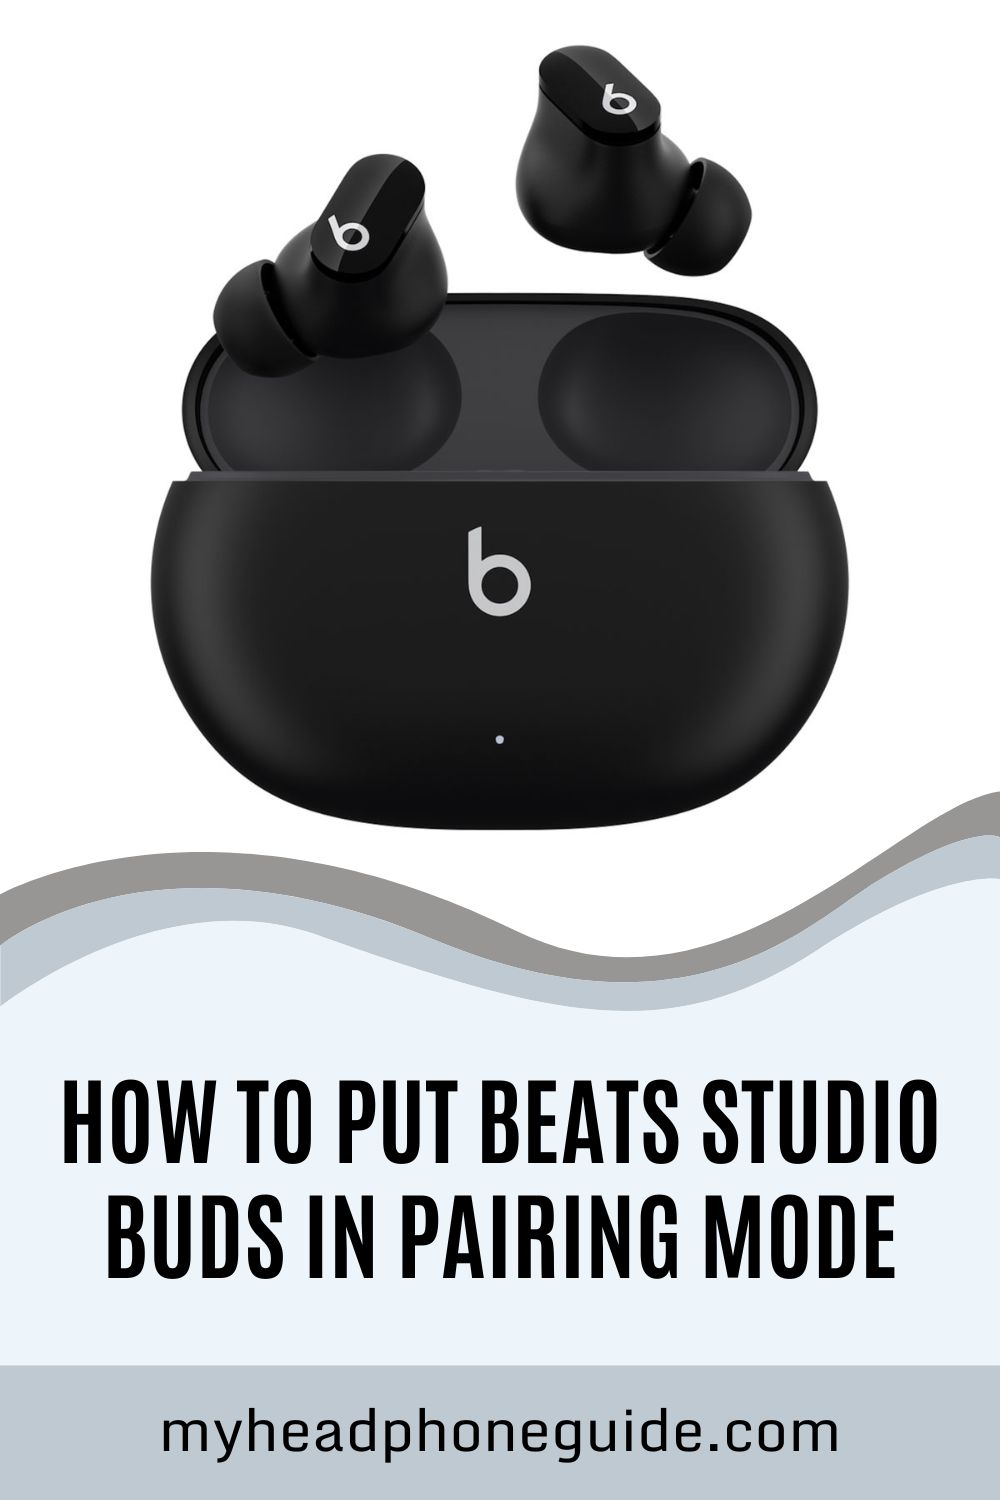 How to Put Beats Studio Buds in Pairing Mode - Image Credit: www.beatsbydre.com